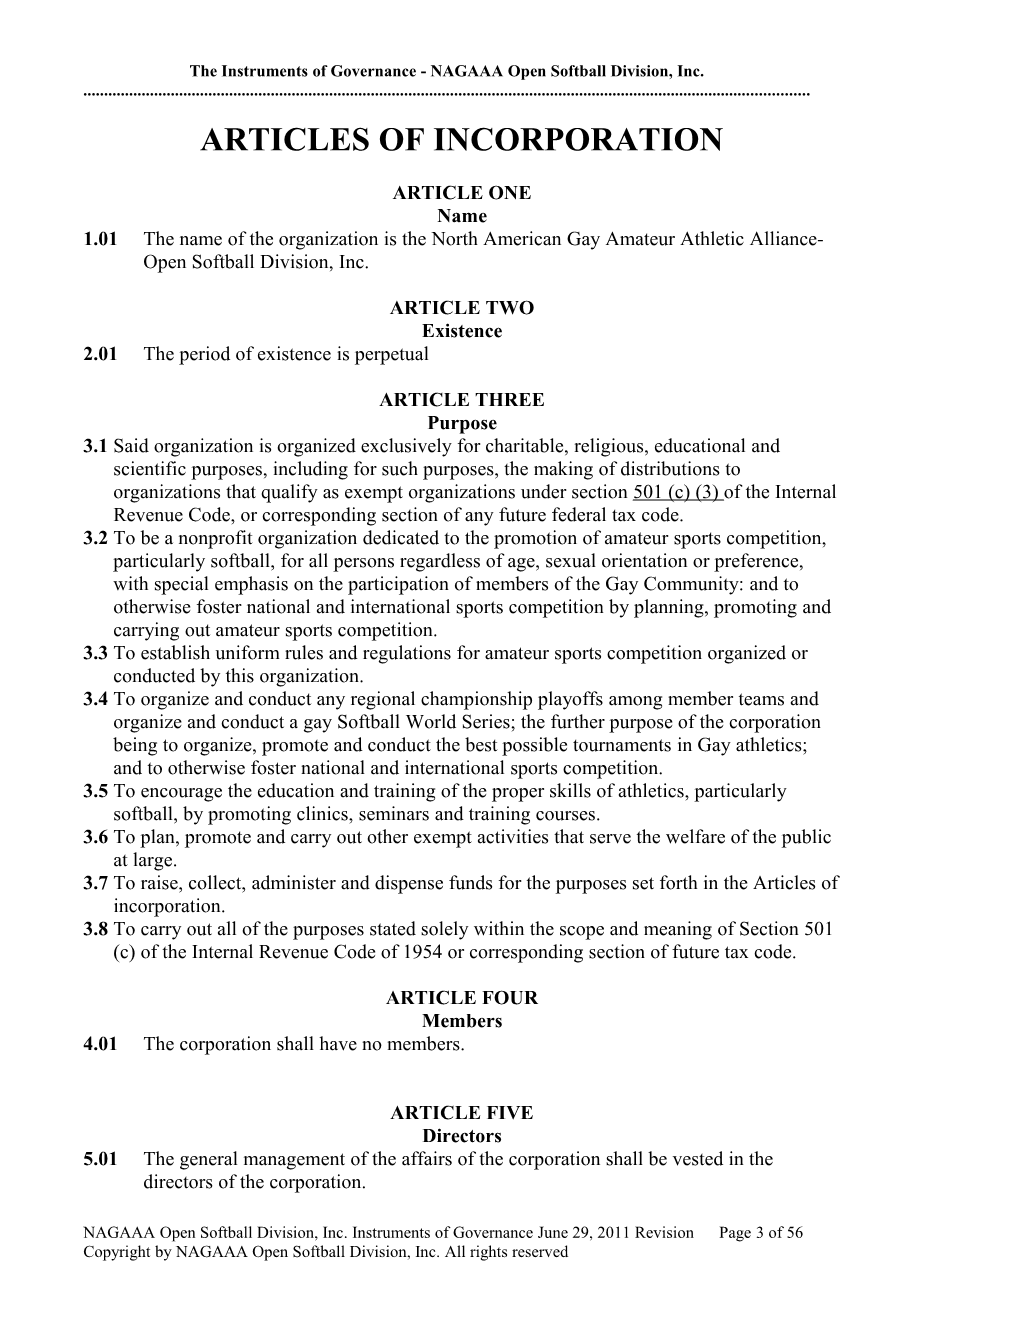 Winter 2004 Bylaws Committee Proposal